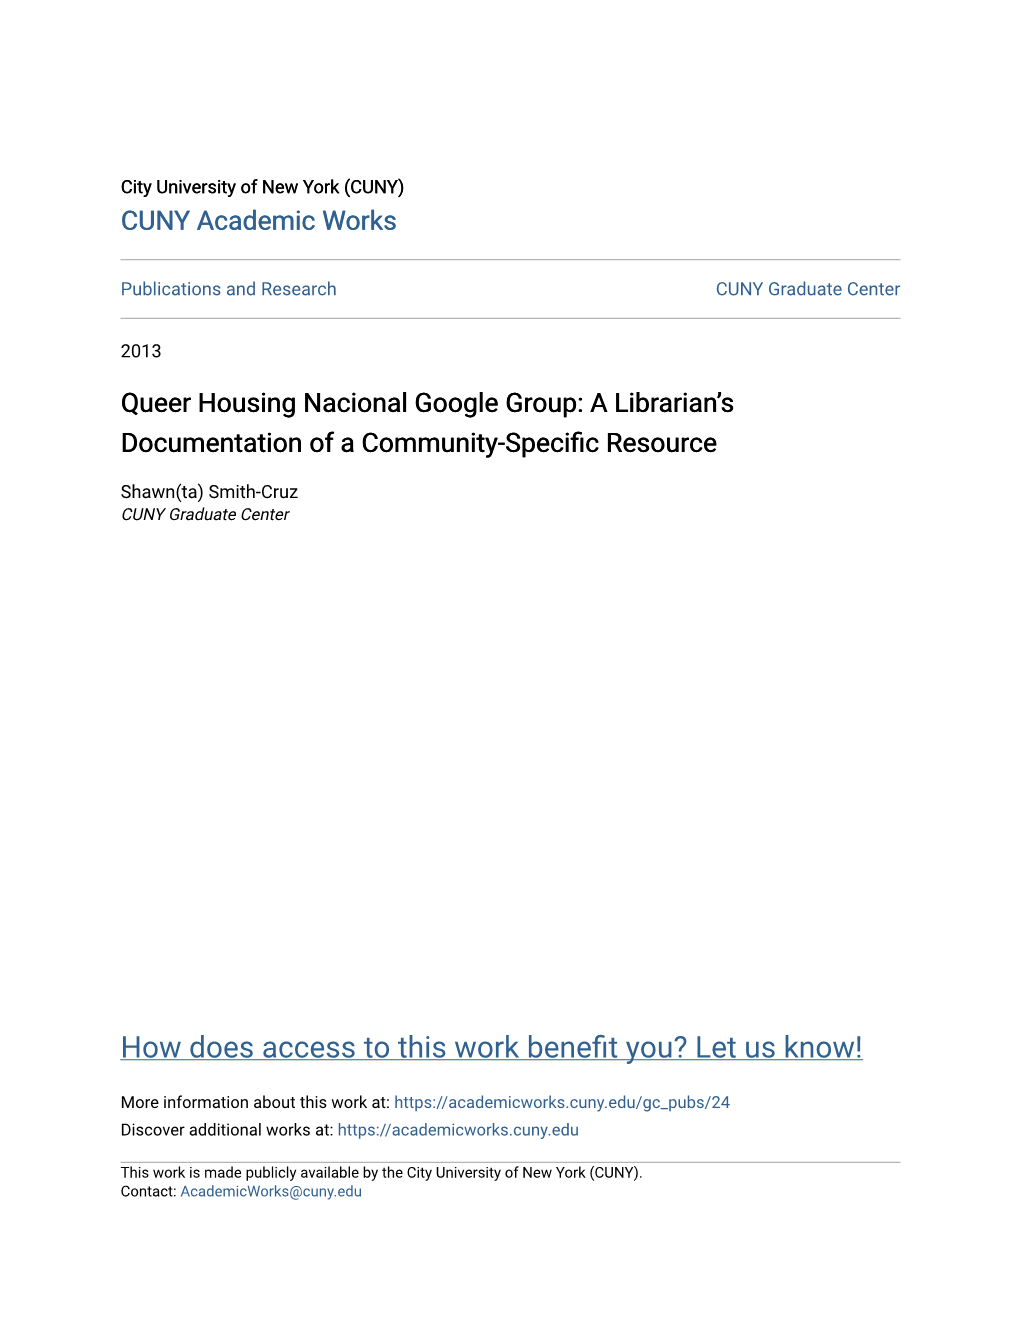 Queer Housing Nacional Google Group: a Librarian’S Documentation of a Community-Specific Resource